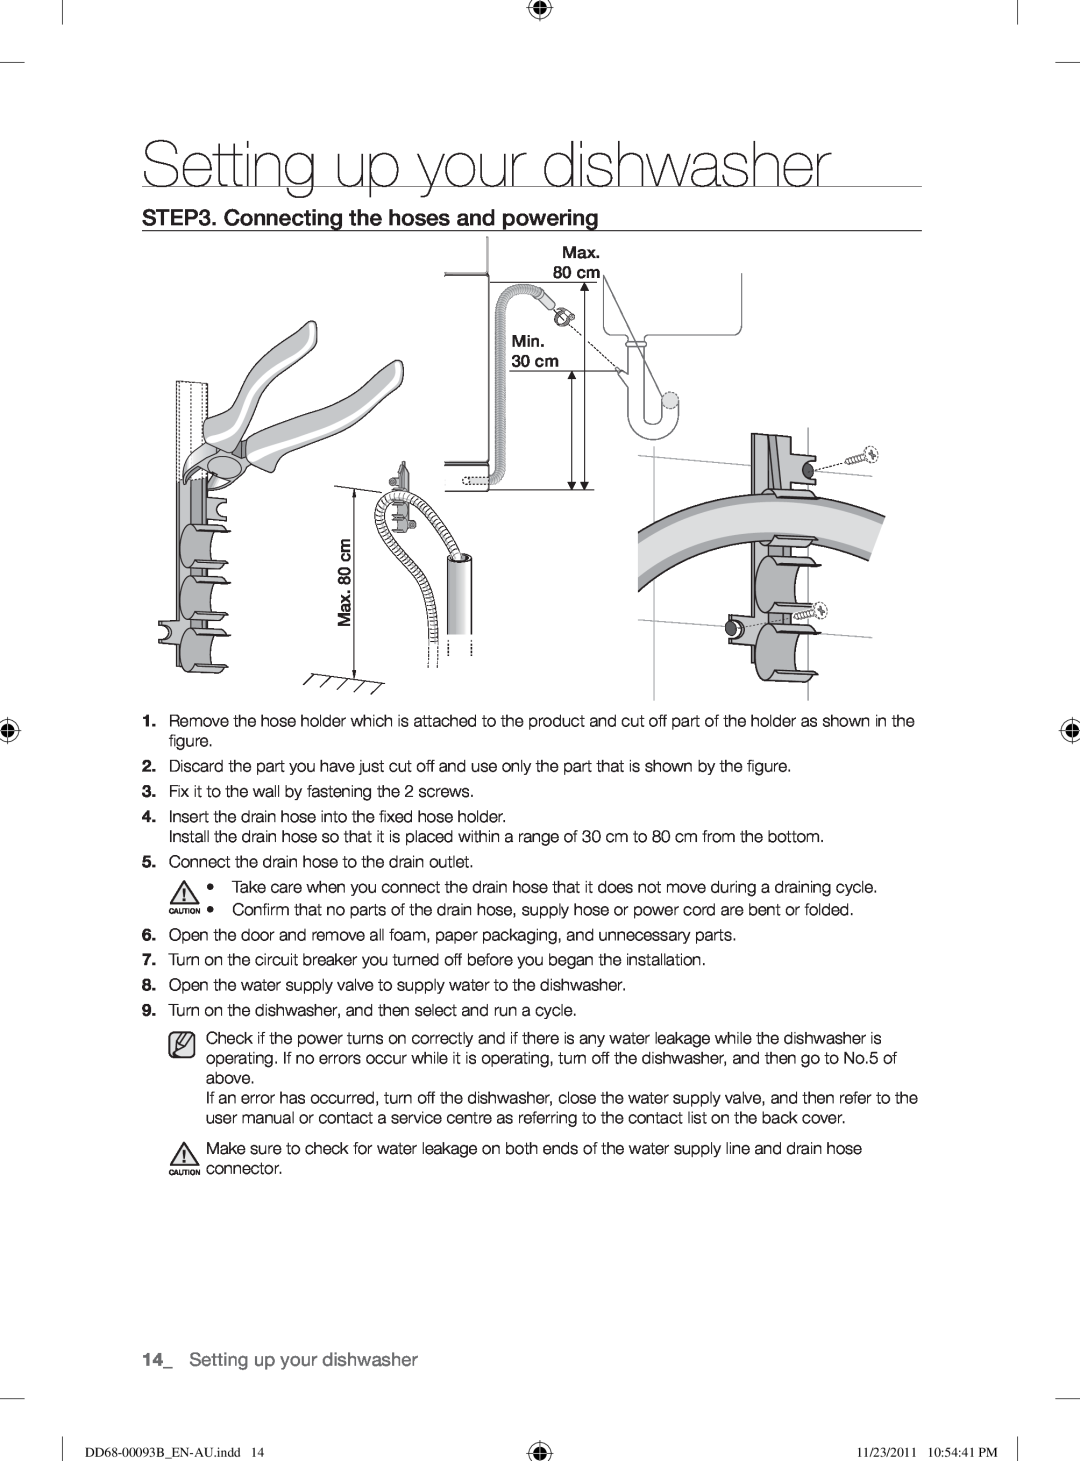 Samsung DW-FG720, DW-FG520 user manual Connecting the hoses and powering, Setting up your dishwasher 